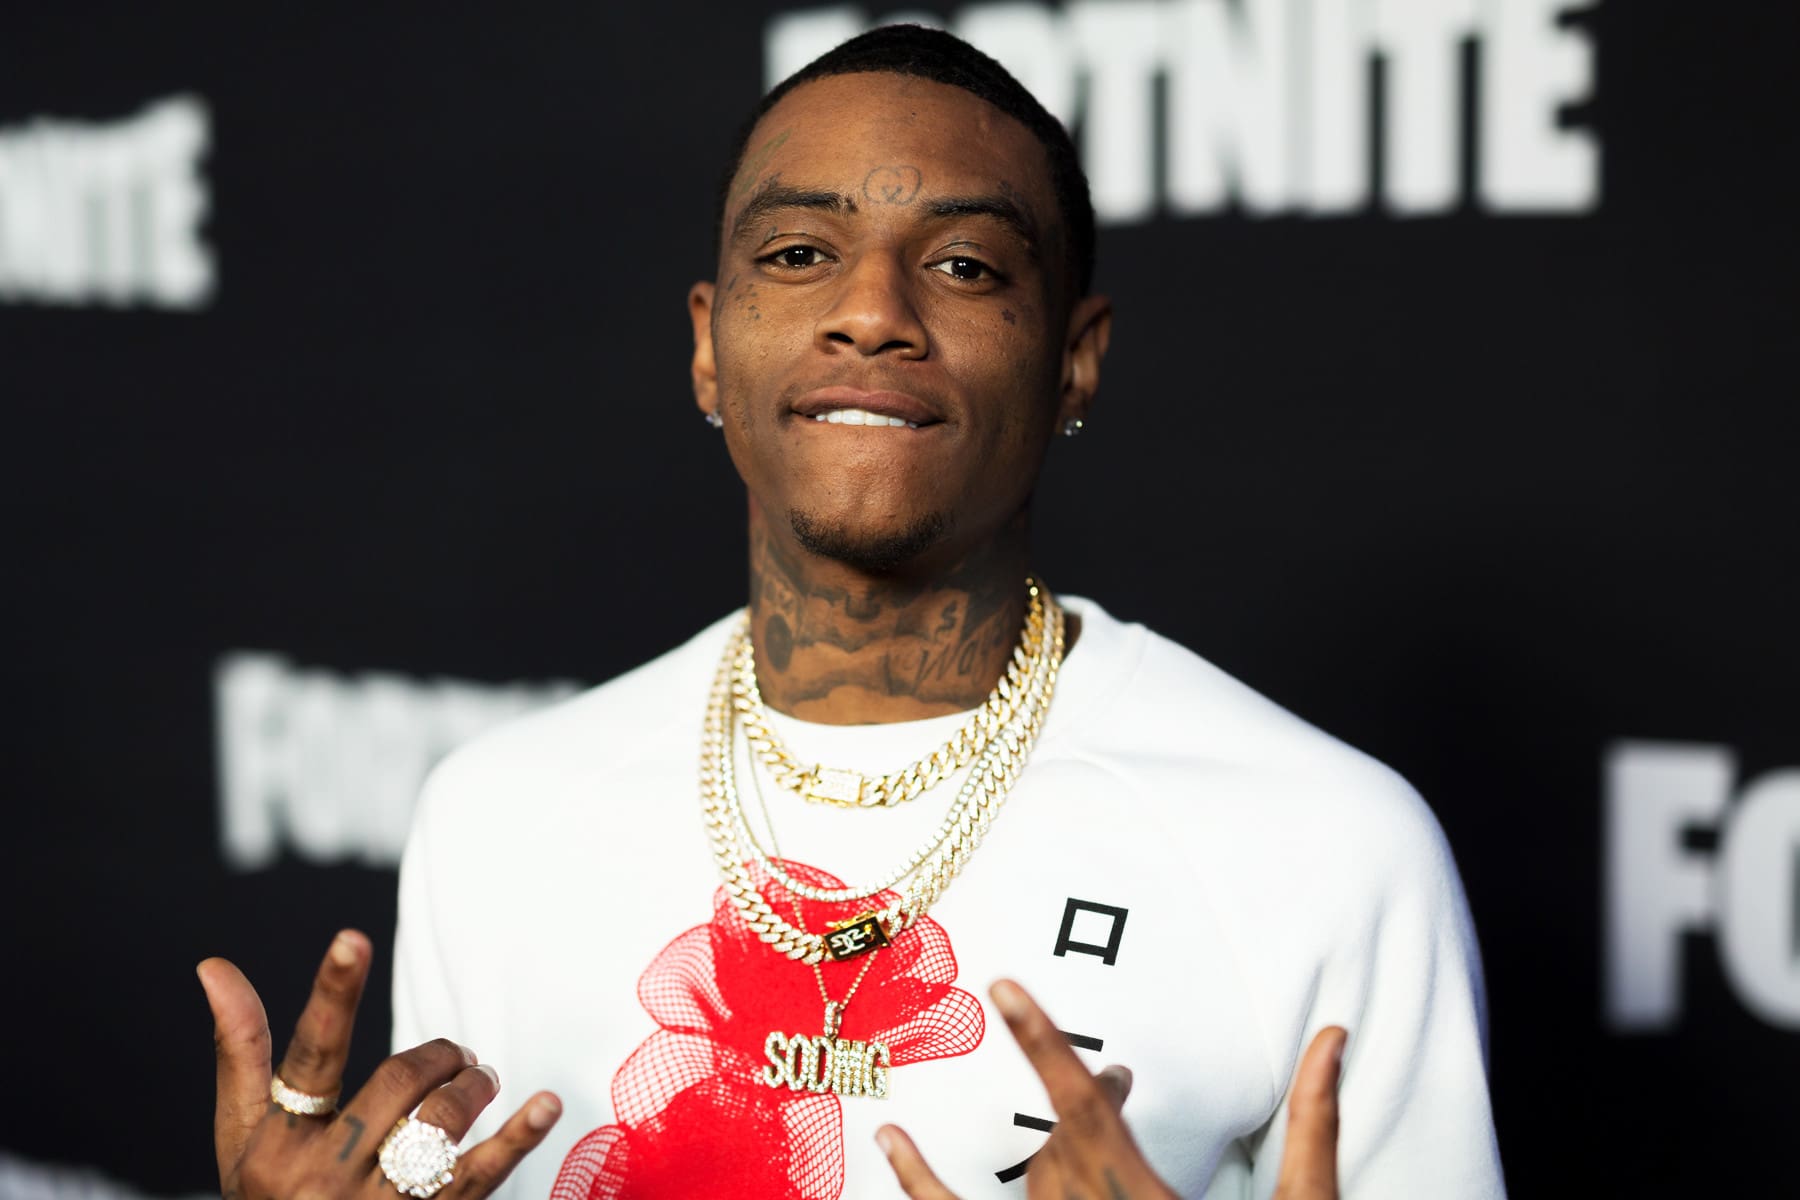 Soulja Boy Is Reportedly Arrested Following Accusations Of Keeping Someone A Hostage - The Cops Found Weapons In His Home